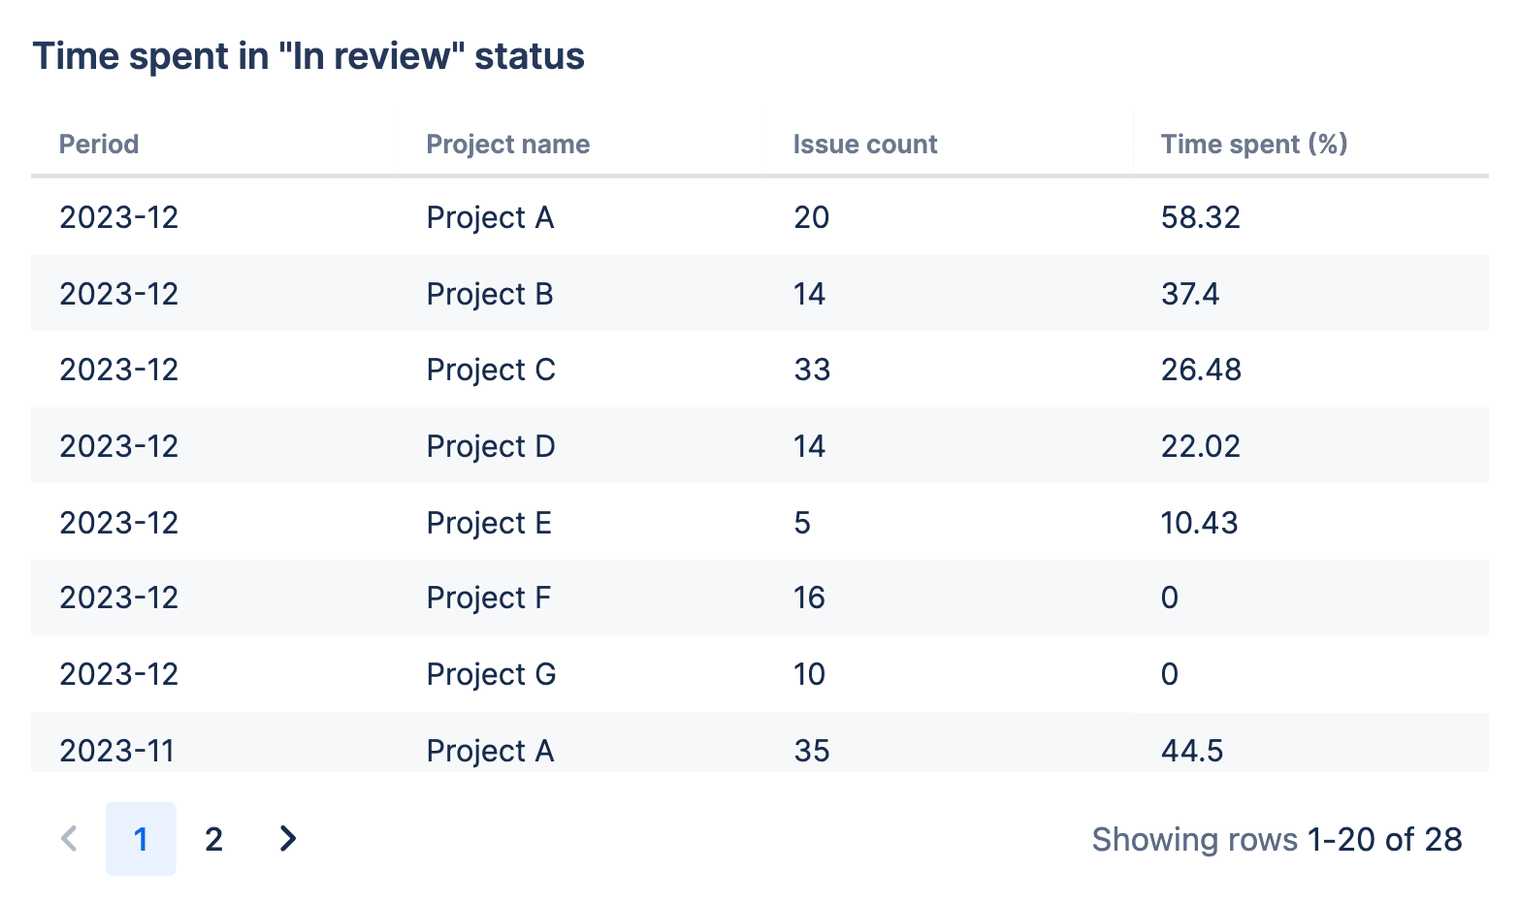 Table chart showing number of issues per project and the percentage of time spent in "In review" status.